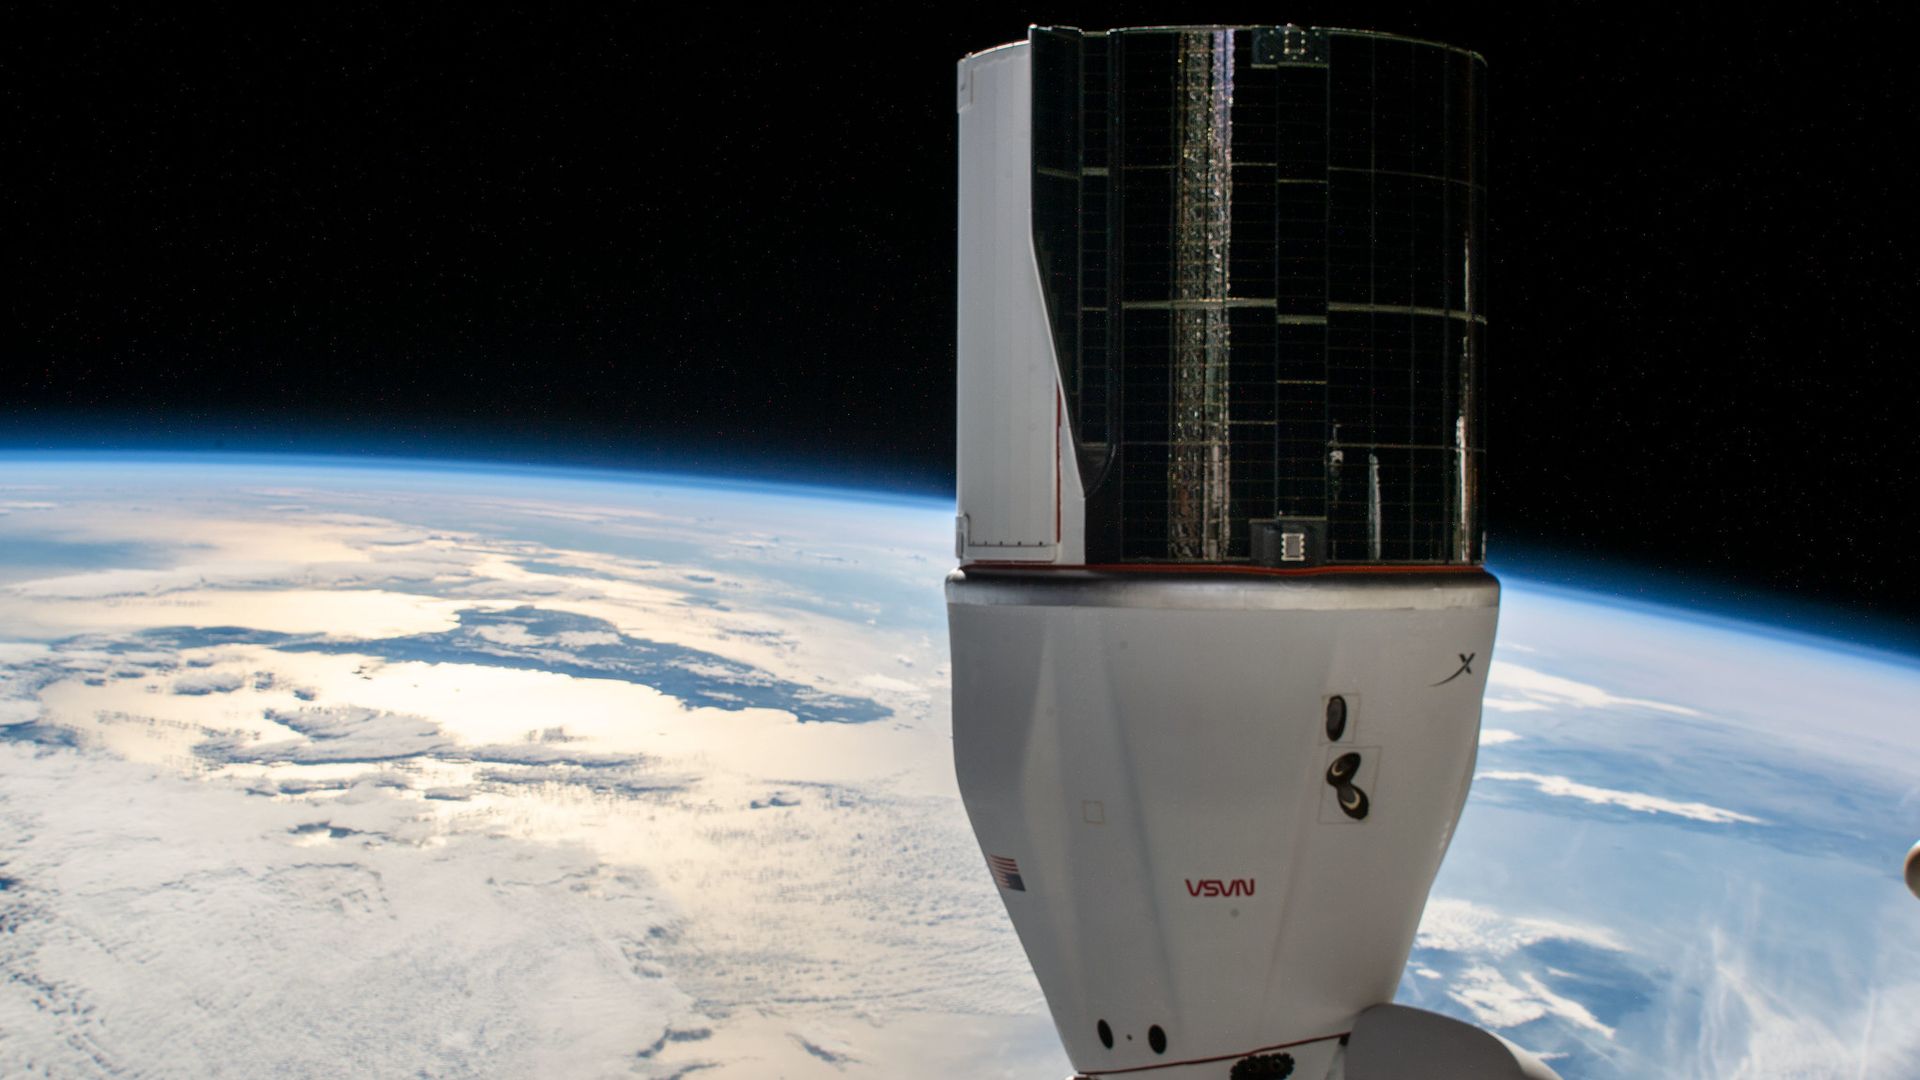 SpaceX Dragon attached to the International Space Station with the limb of the Earth stretching behind